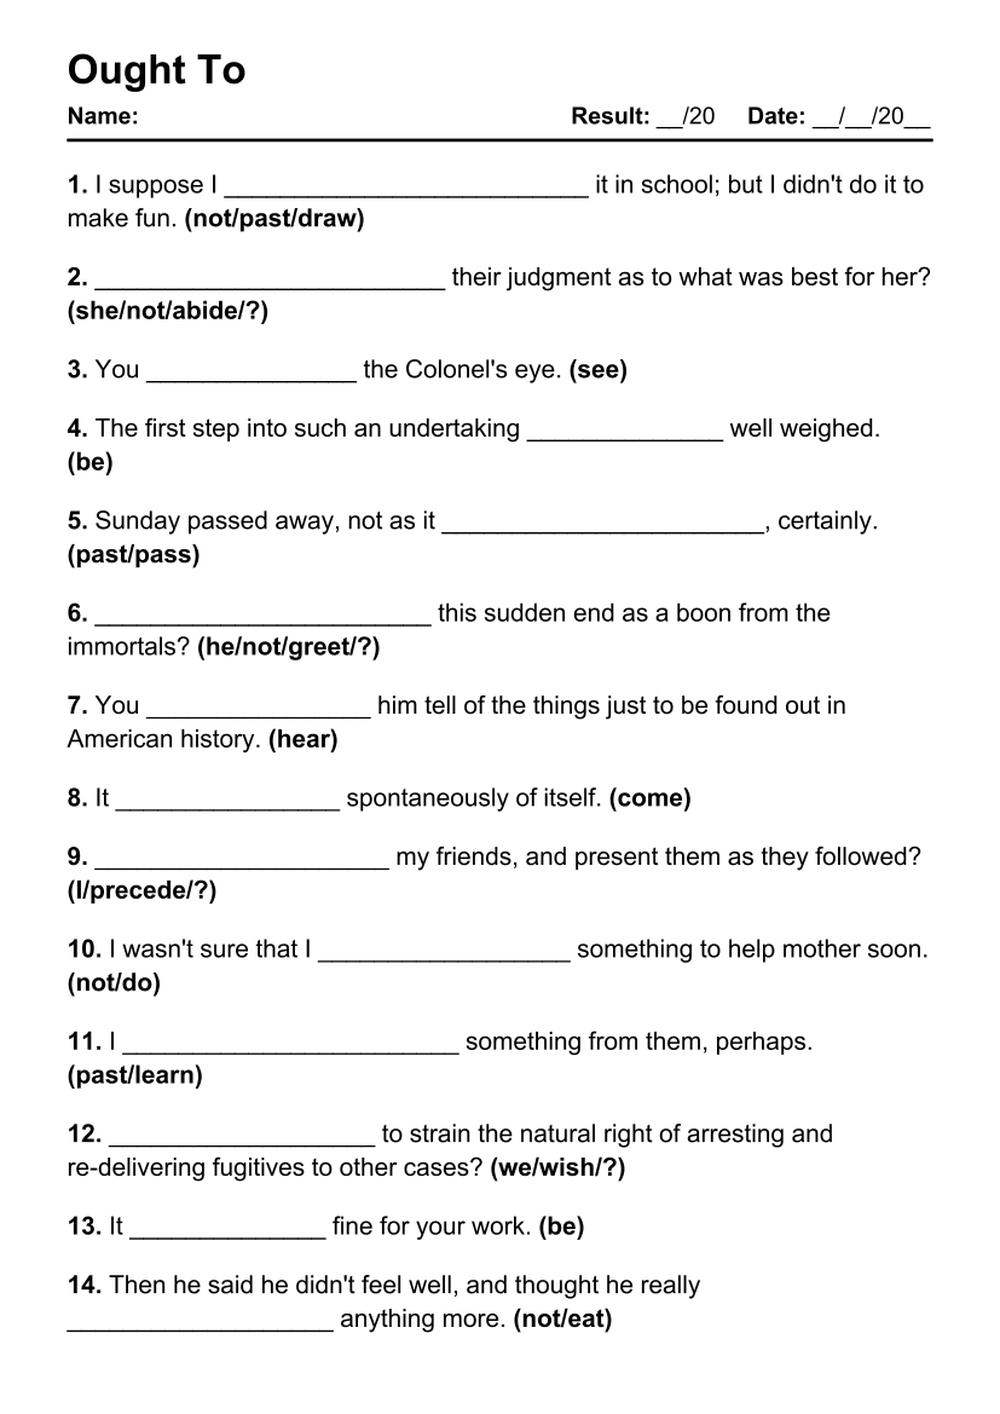 Printable Ought To Exercises - PDF Worksheet with Answers - Test 26